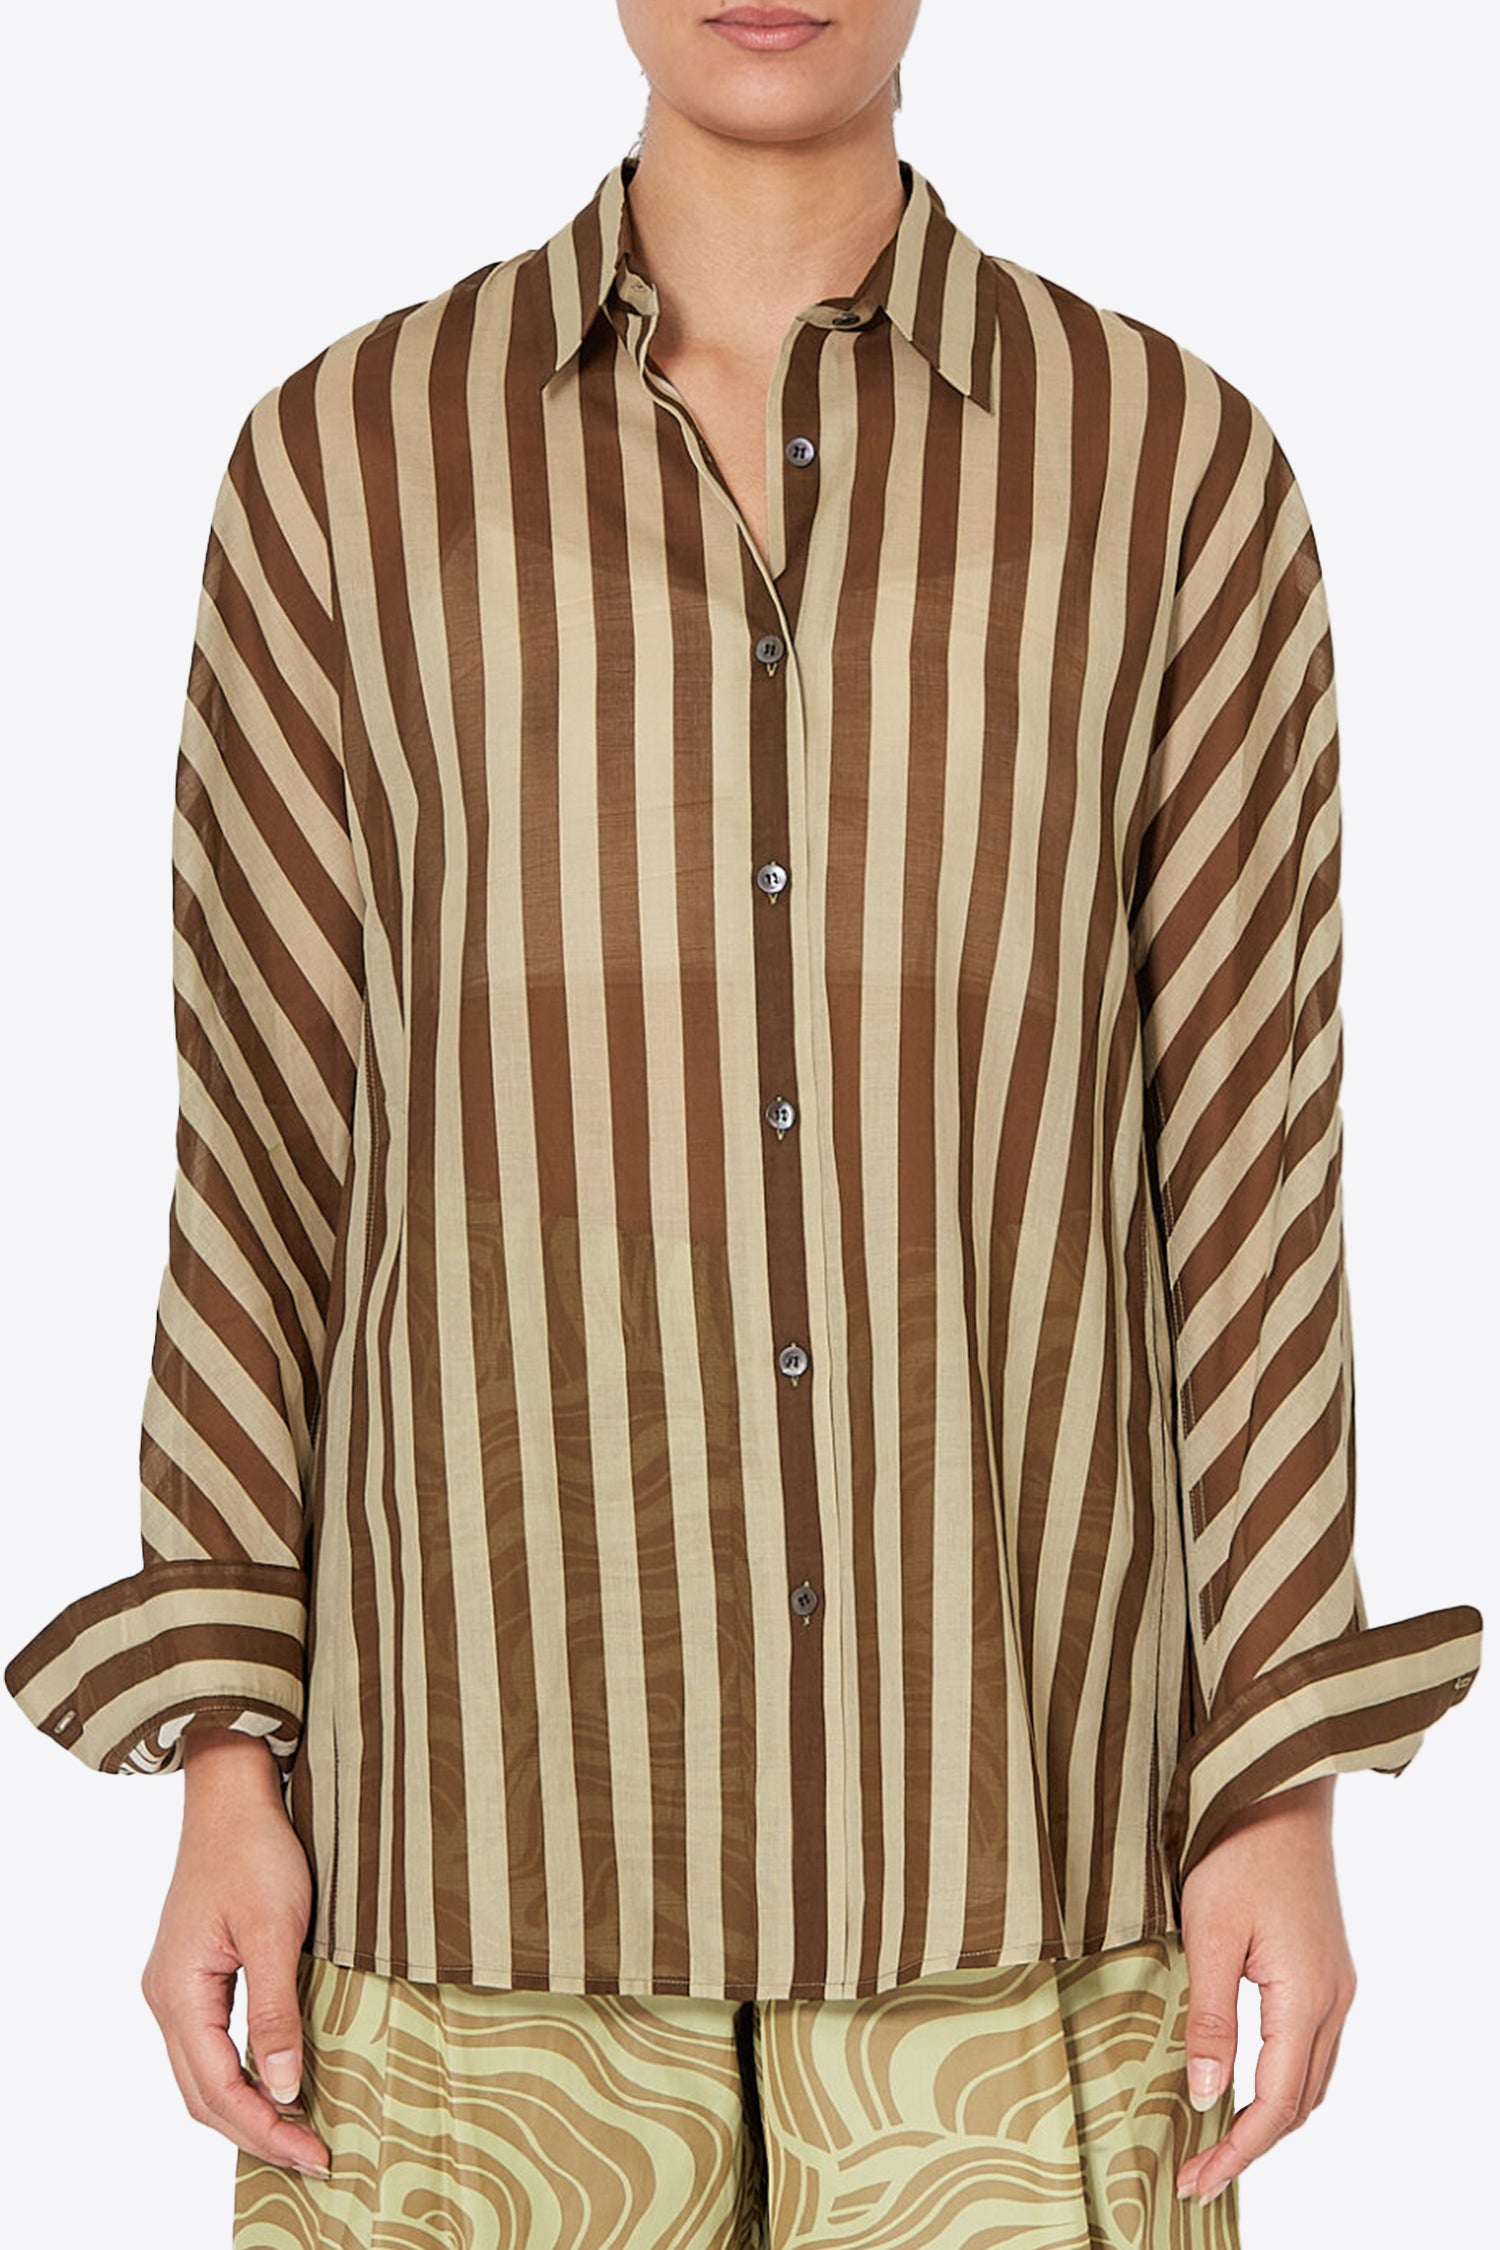 CASIO SHIRT IN BROWN, SS24